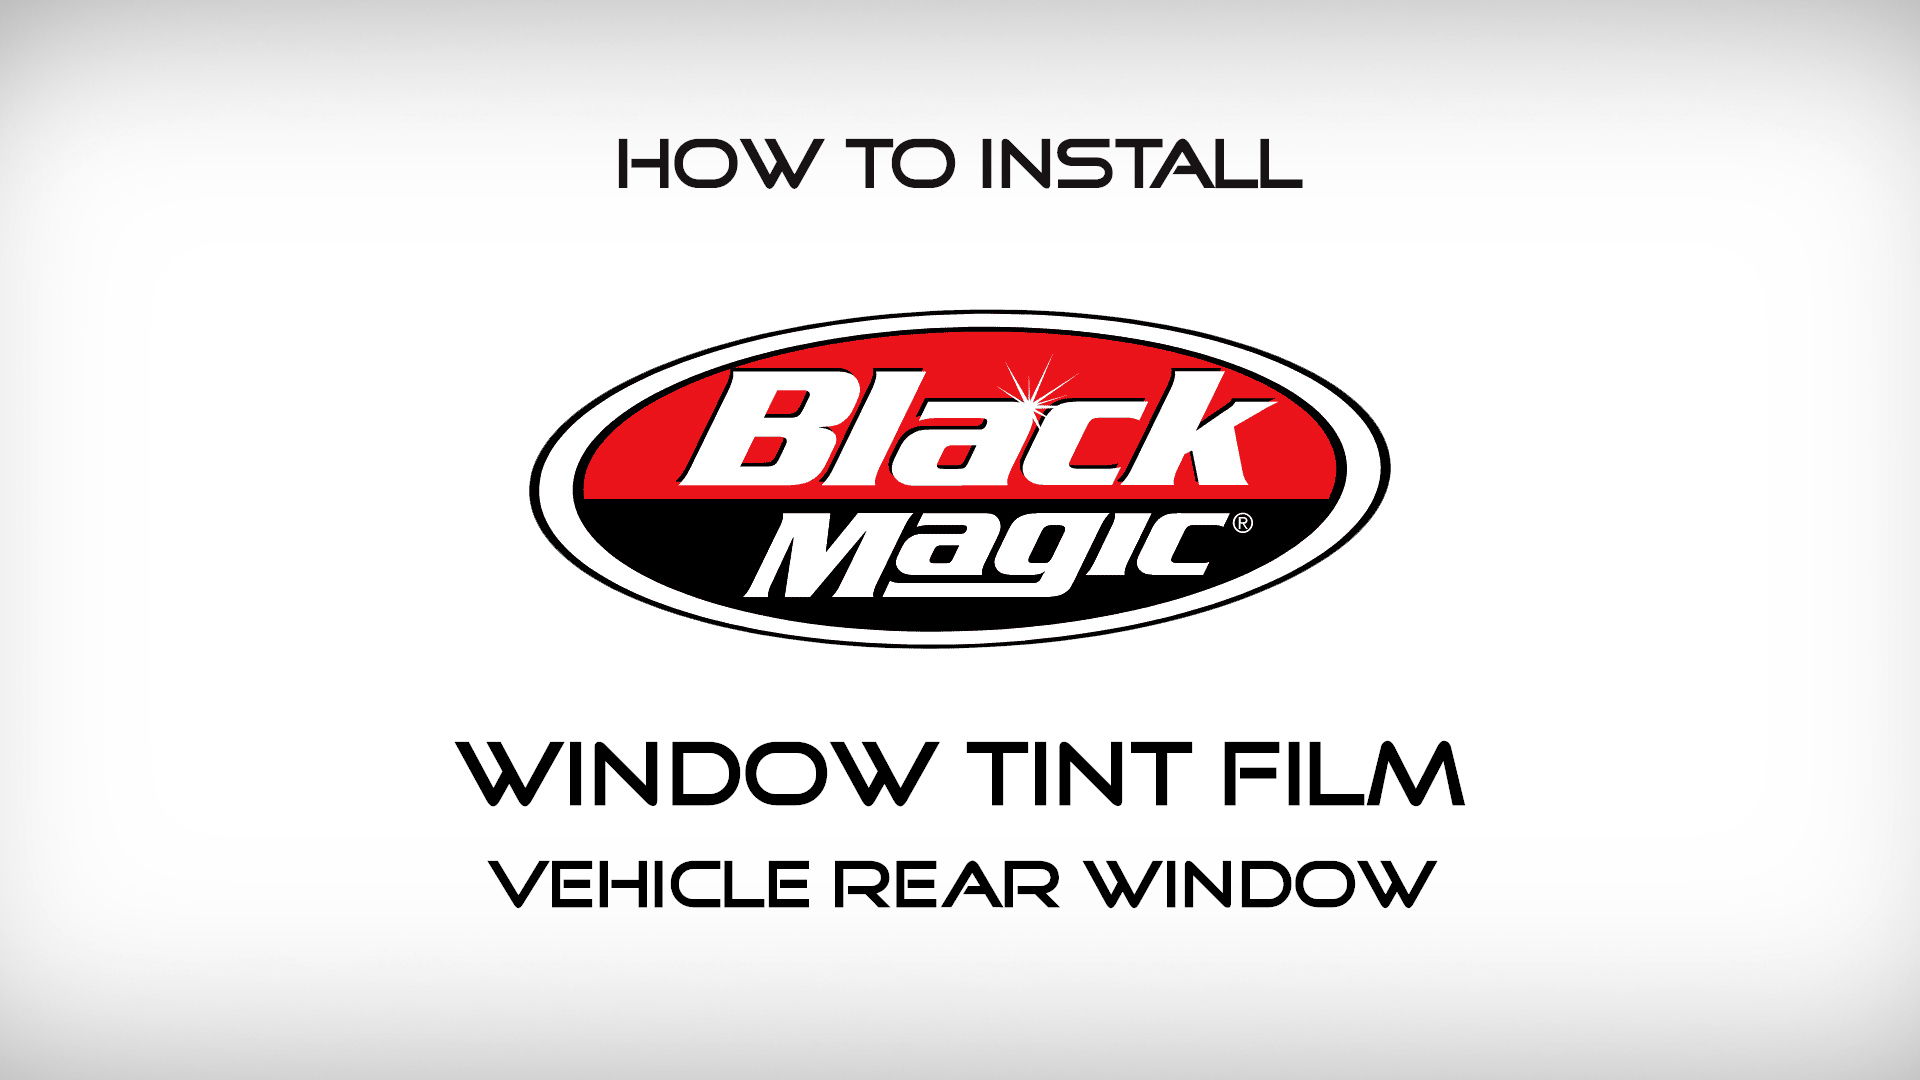 Professional vs DIY Window Tint: Why You Shouldn't Do It Yourself